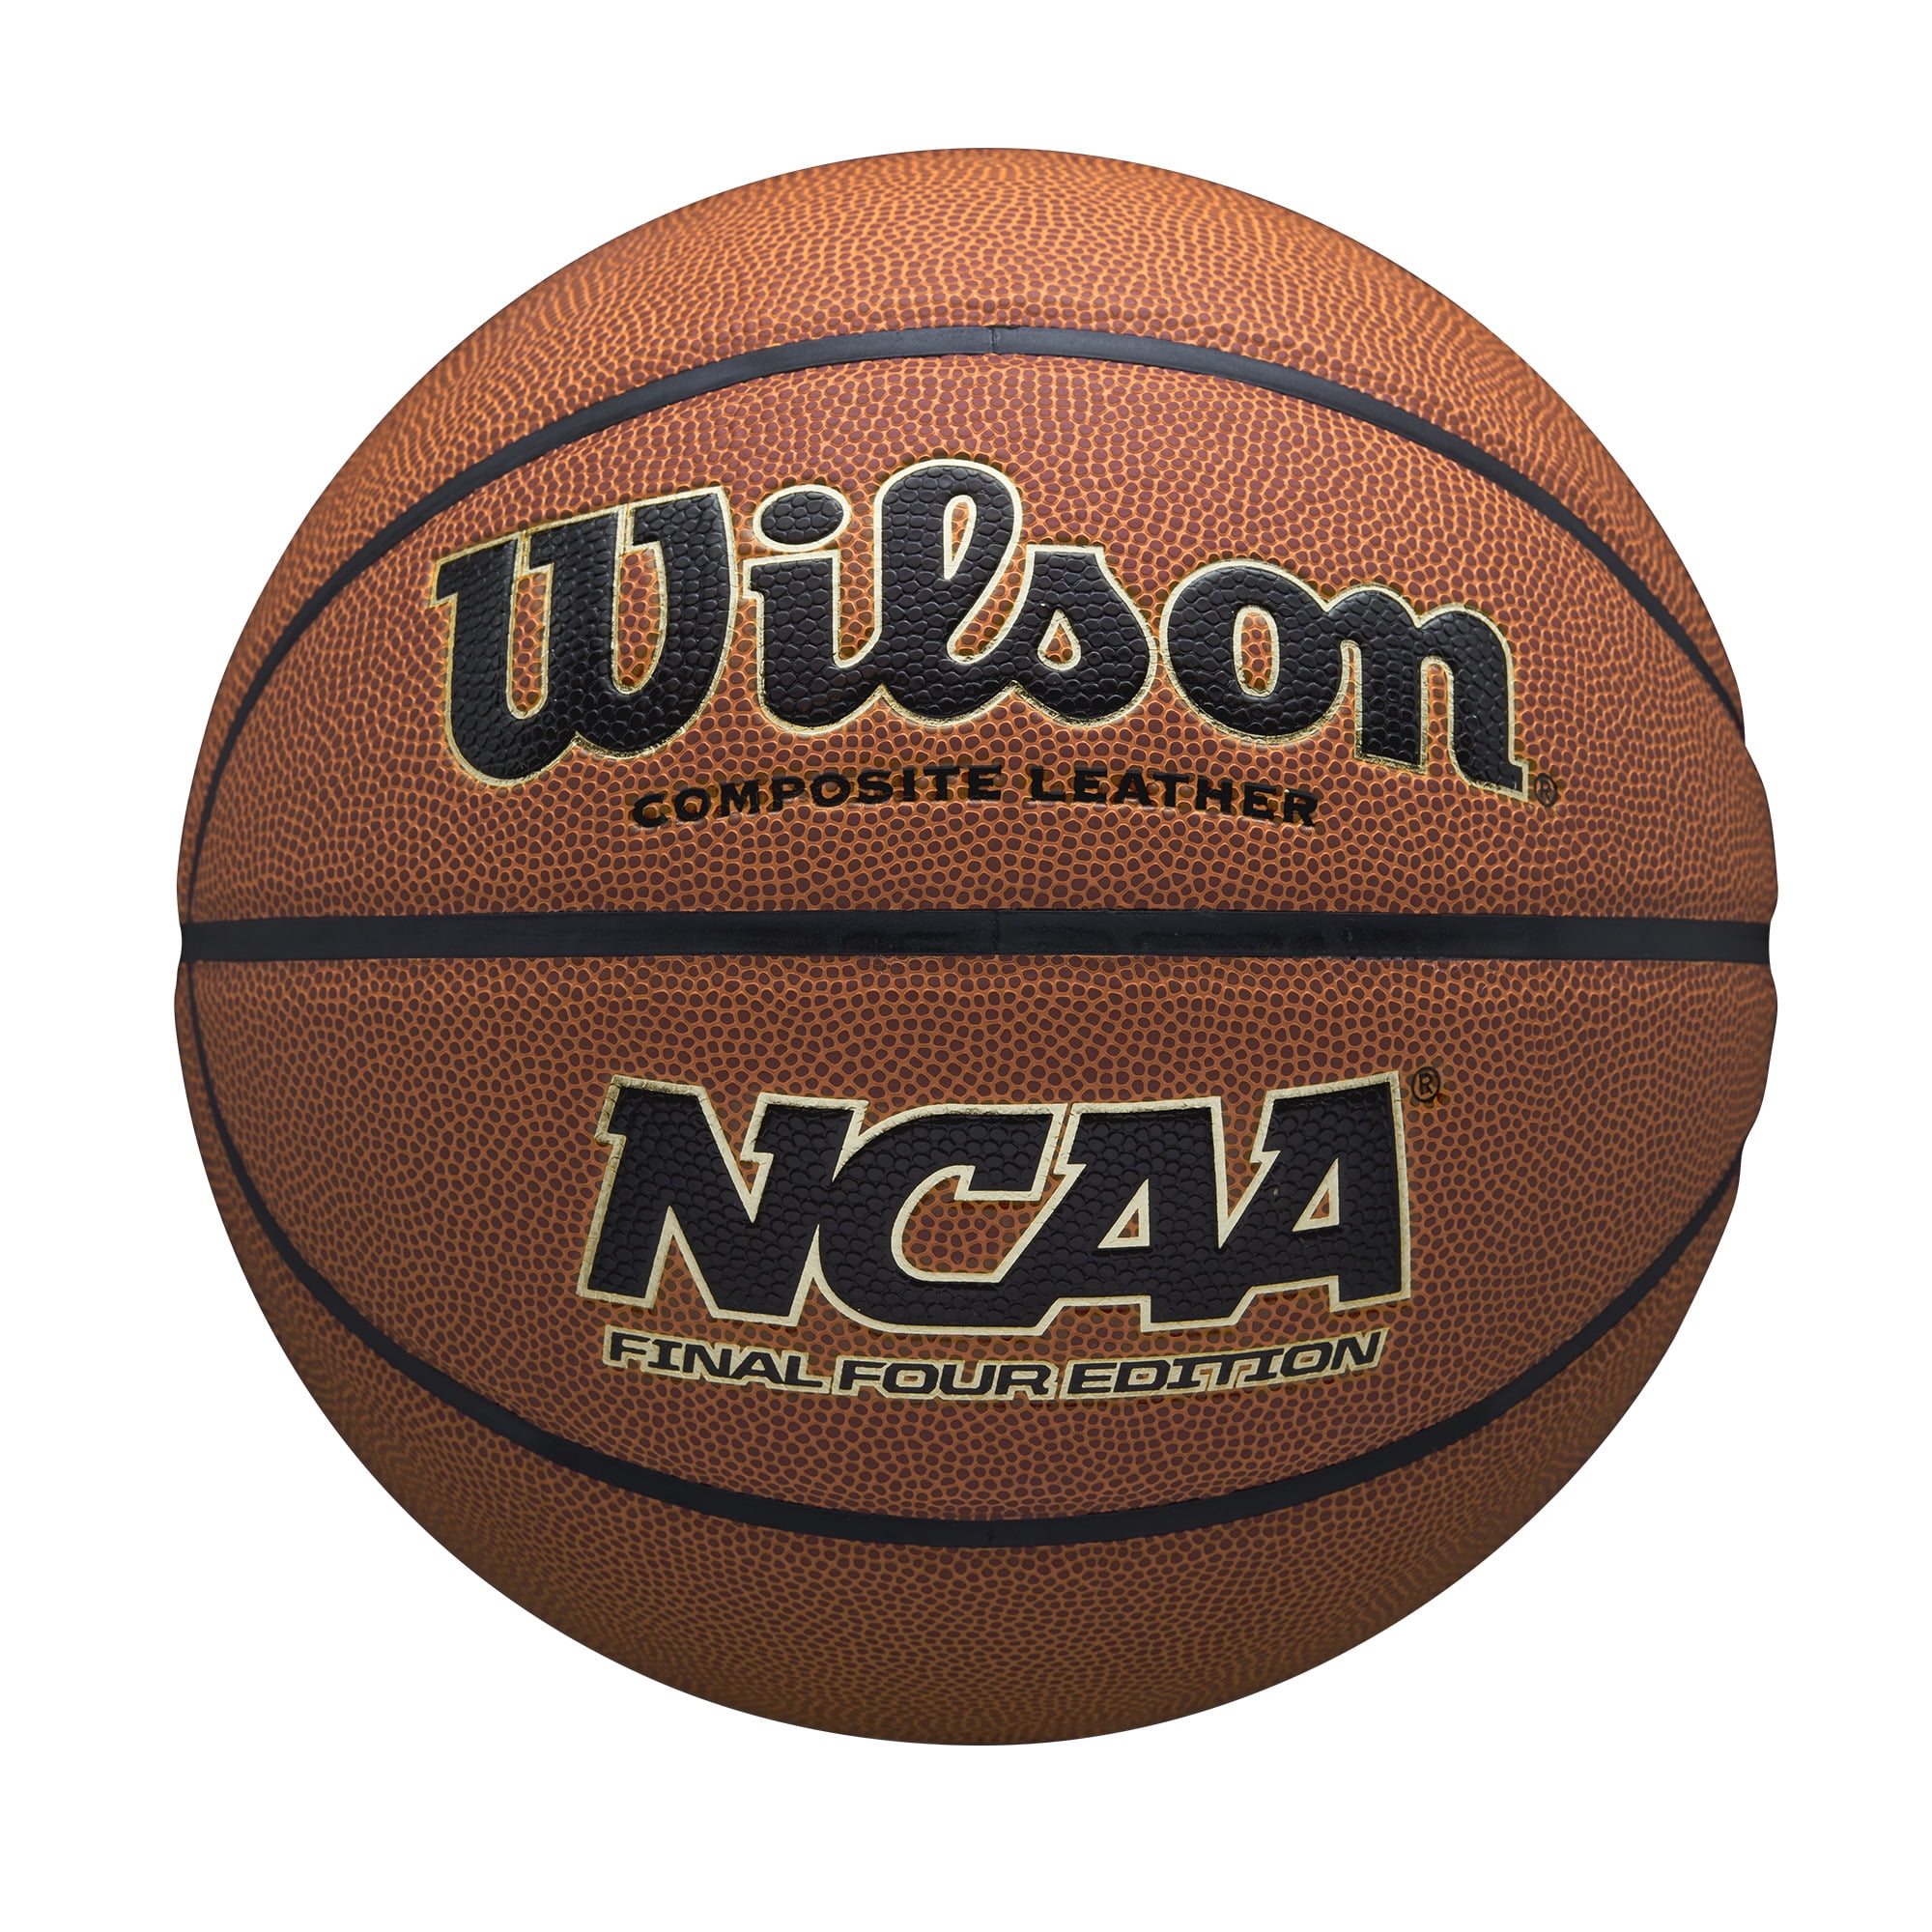 29.5" NEW!! Wilson Evolution Official Size Game Basketball WTB0516 Size 7 Mens 